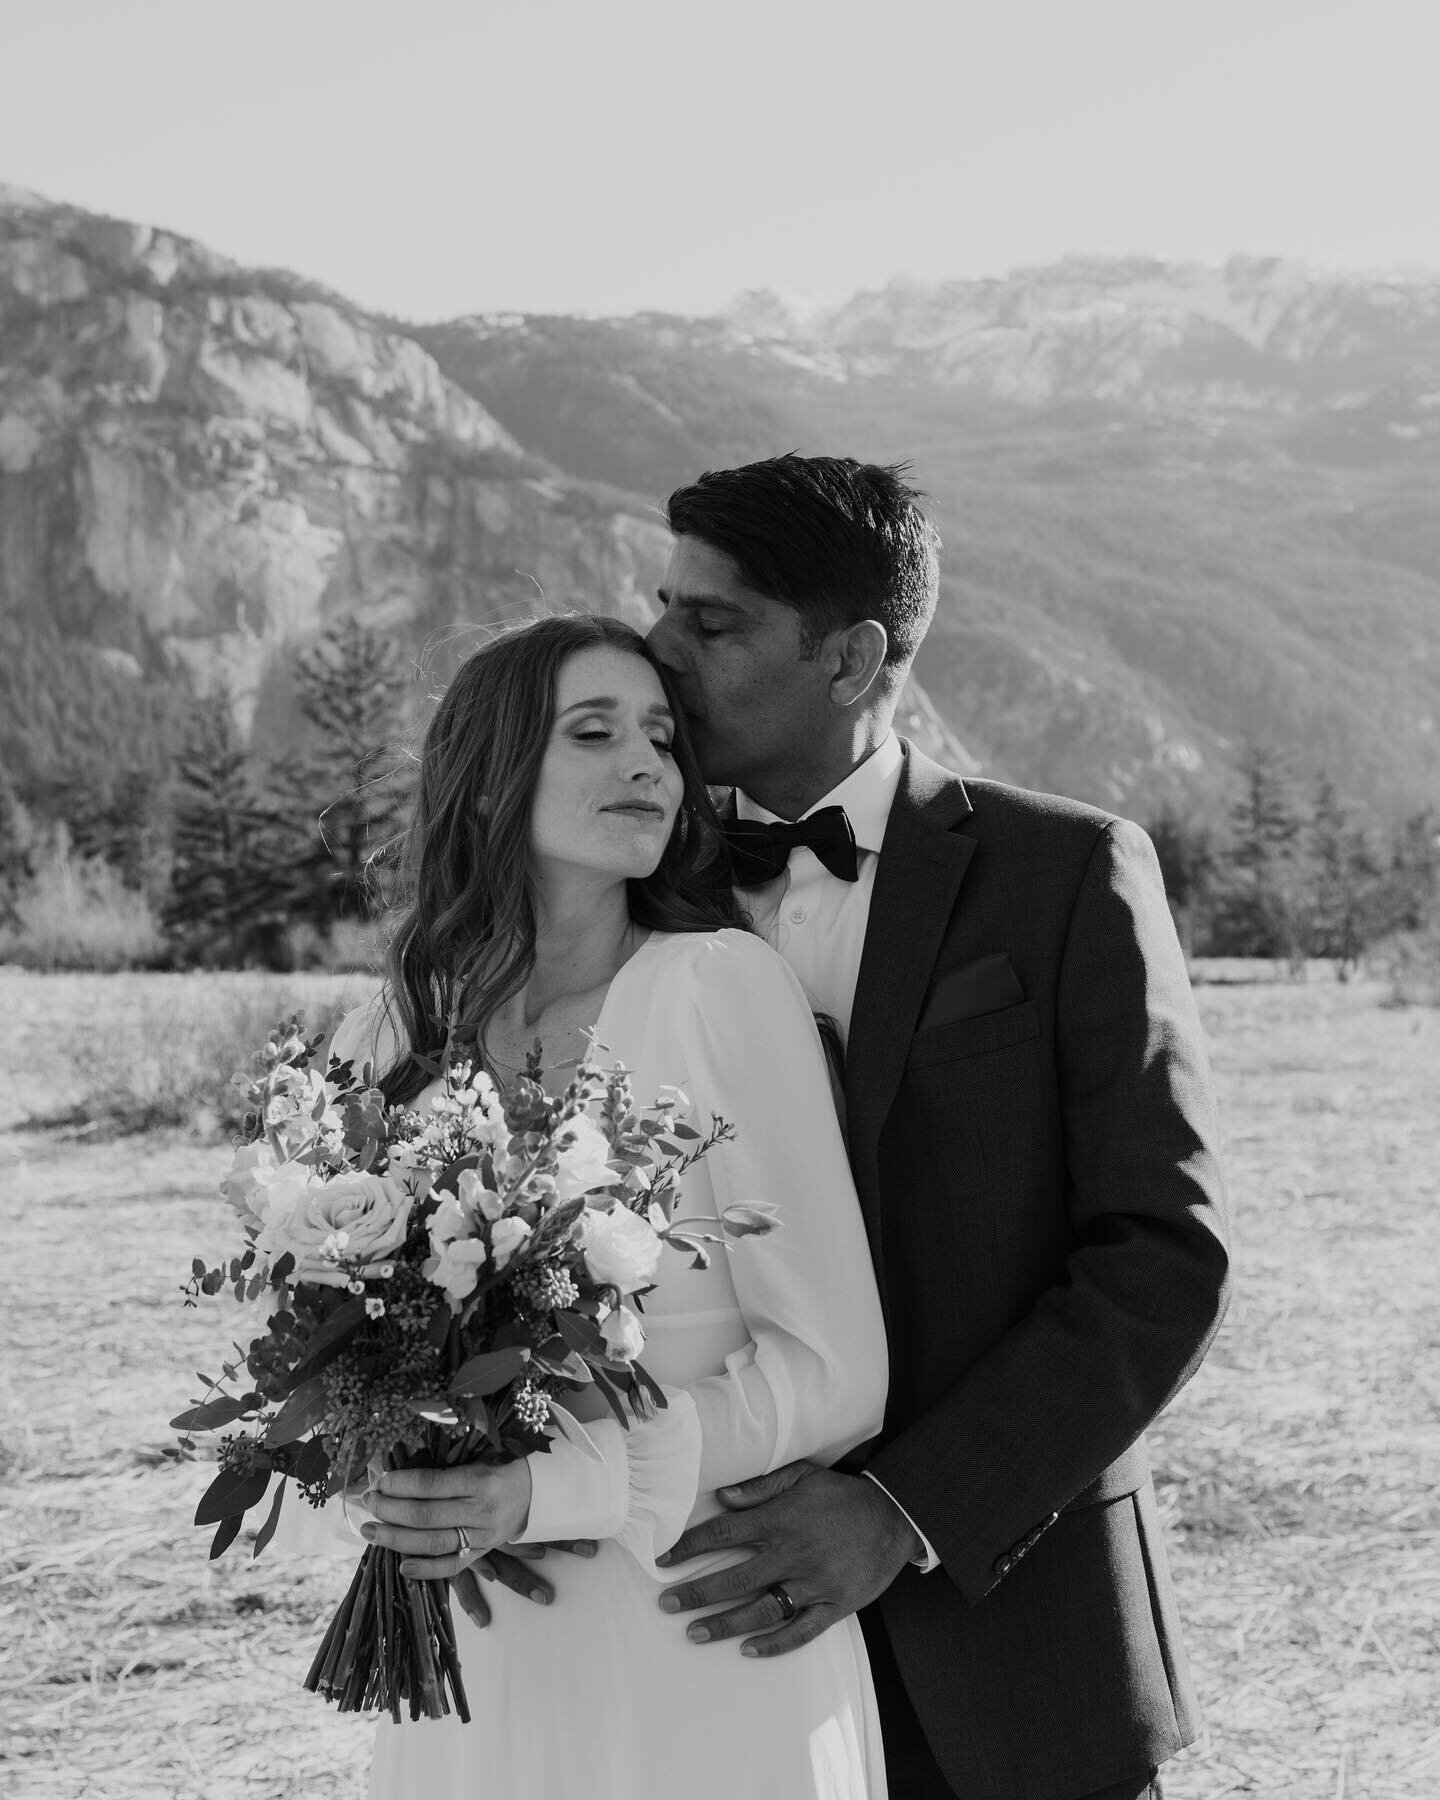 I can&rsquo;t believe it&rsquo;s almost been a year for these two 🥰
.
#yvr #winterwedding #squamish #exploresquamish #vancouverwedding #squamishweddingphotographer #vancouverweddingphotographer #squamishwedding #seatoskywedding